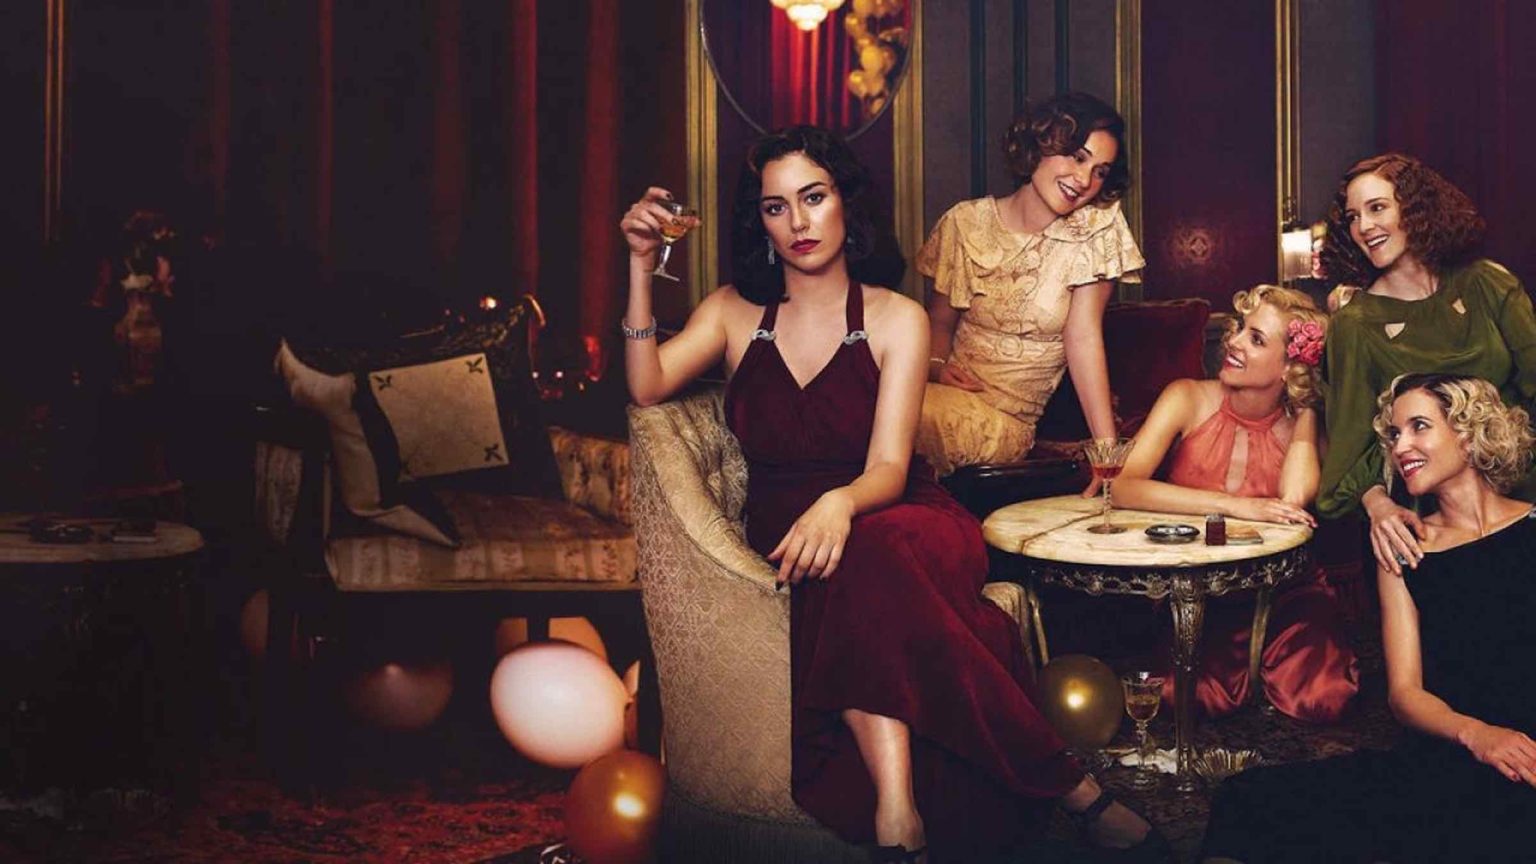 'Cable Girls' is the first Spanish-language Netflix original series. If you’re ready to binge a new series, then here’s why you should watch 'Cable Girls'.